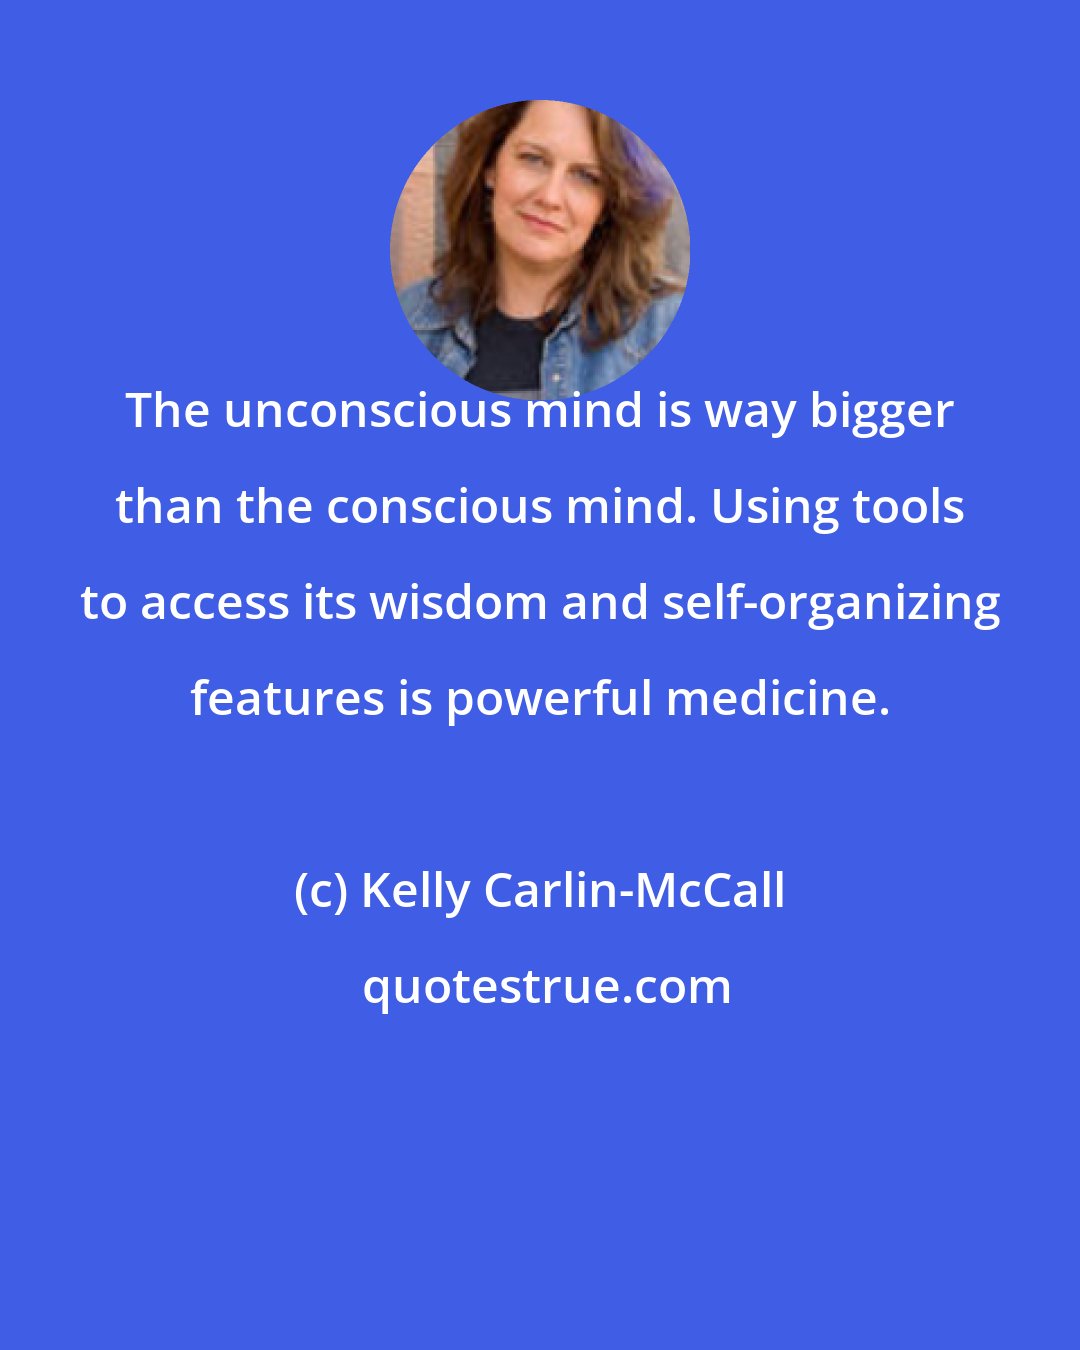 Kelly Carlin-McCall: The unconscious mind is way bigger than the conscious mind. Using tools to access its wisdom and self-organizing features is powerful medicine.